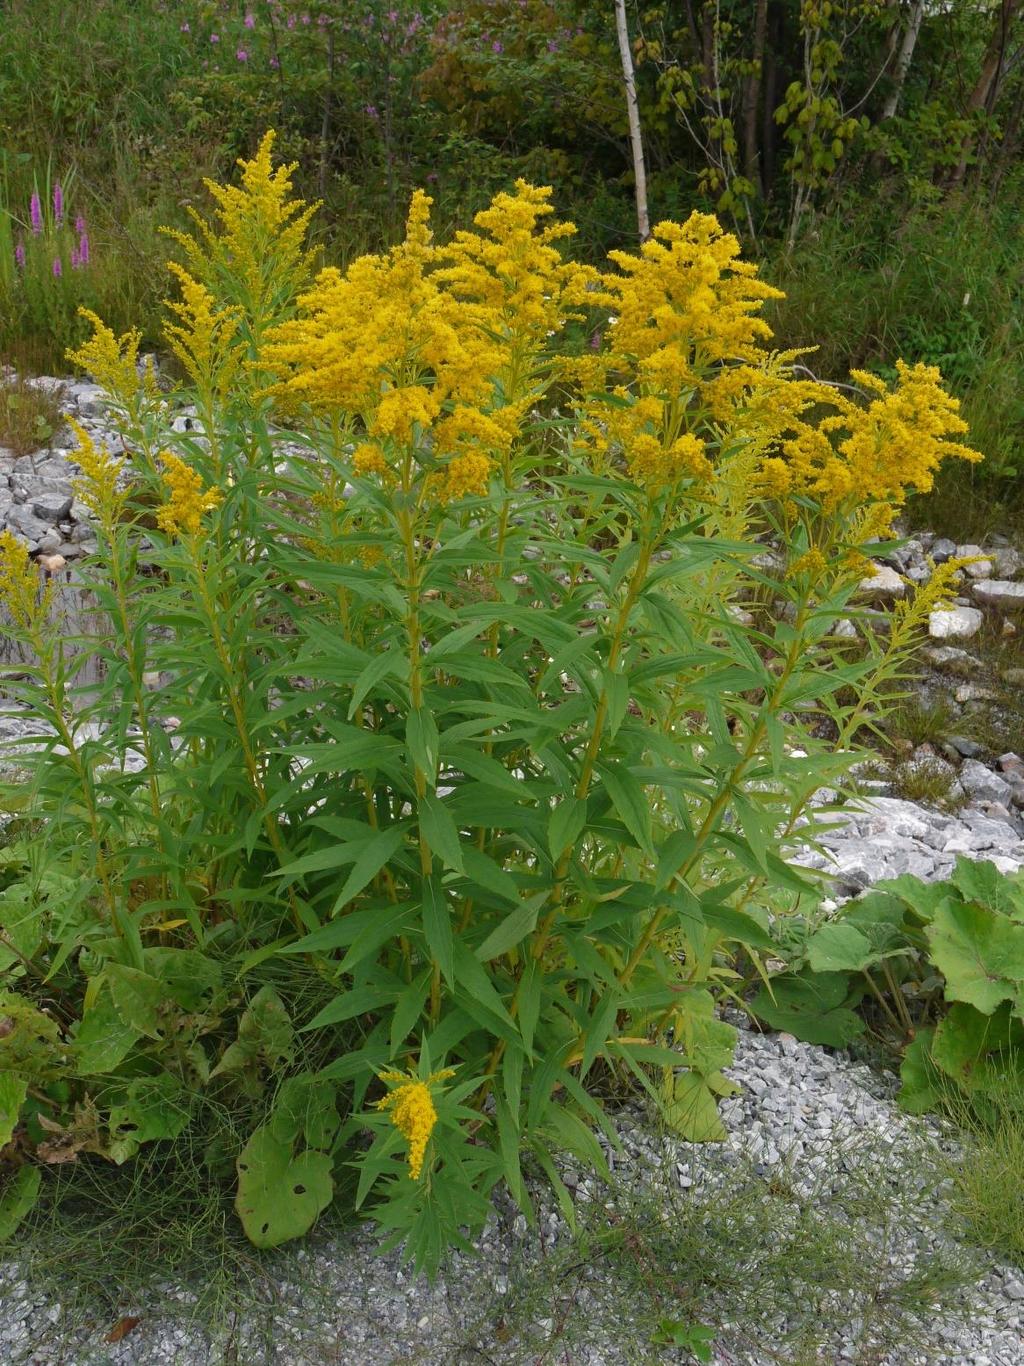 Canada Goldenrod (Solidago canadensis) grows to a meter or more